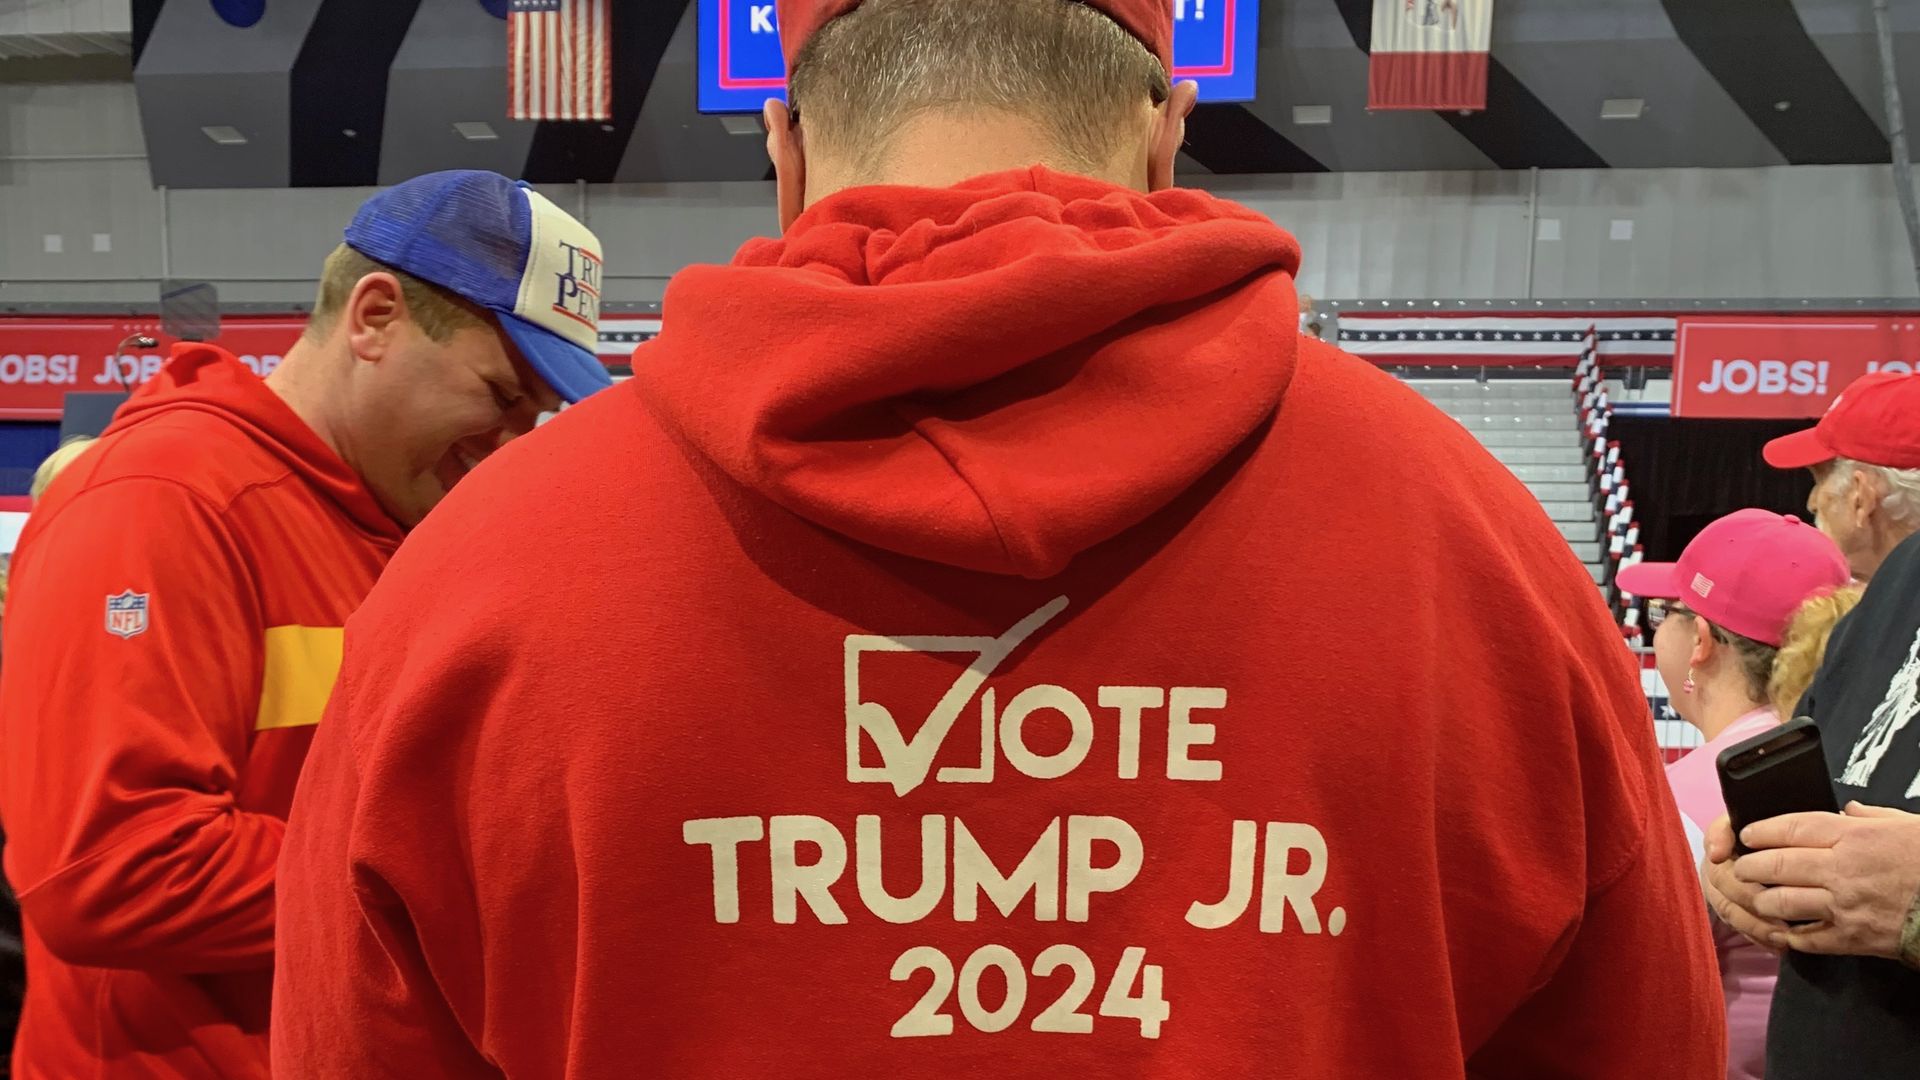 Man wearing a sweater saying vote for Trump Junior in 2024.